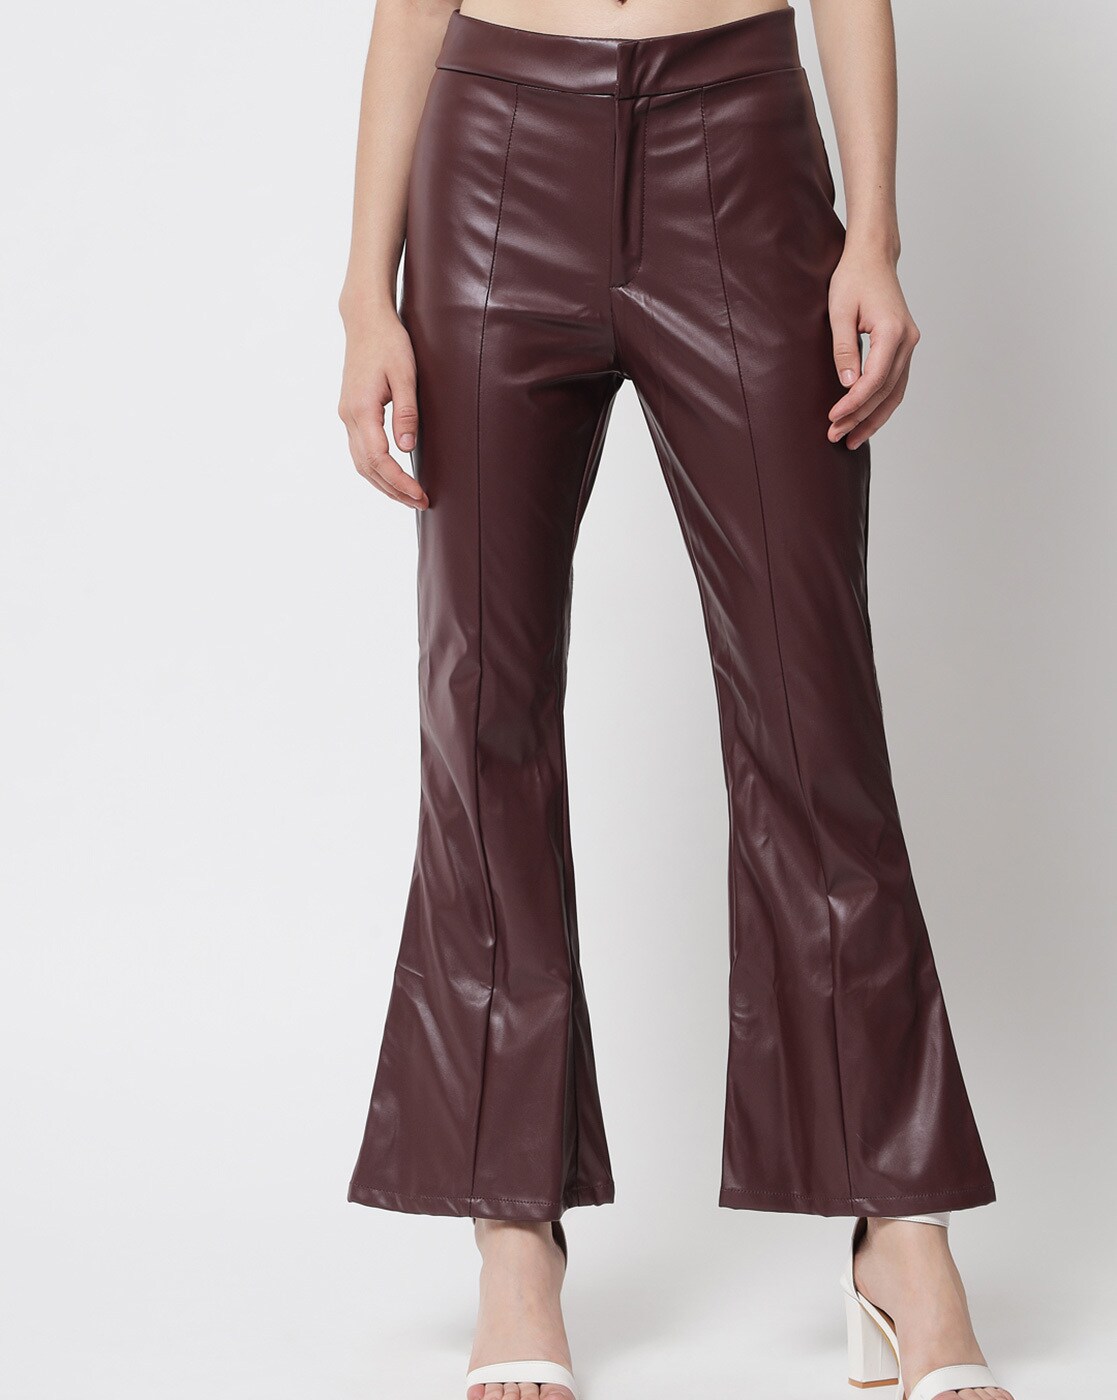 Leather Cropped Pants for Ladies in Brown   34900  Zinga Leather   ZINGA Leather